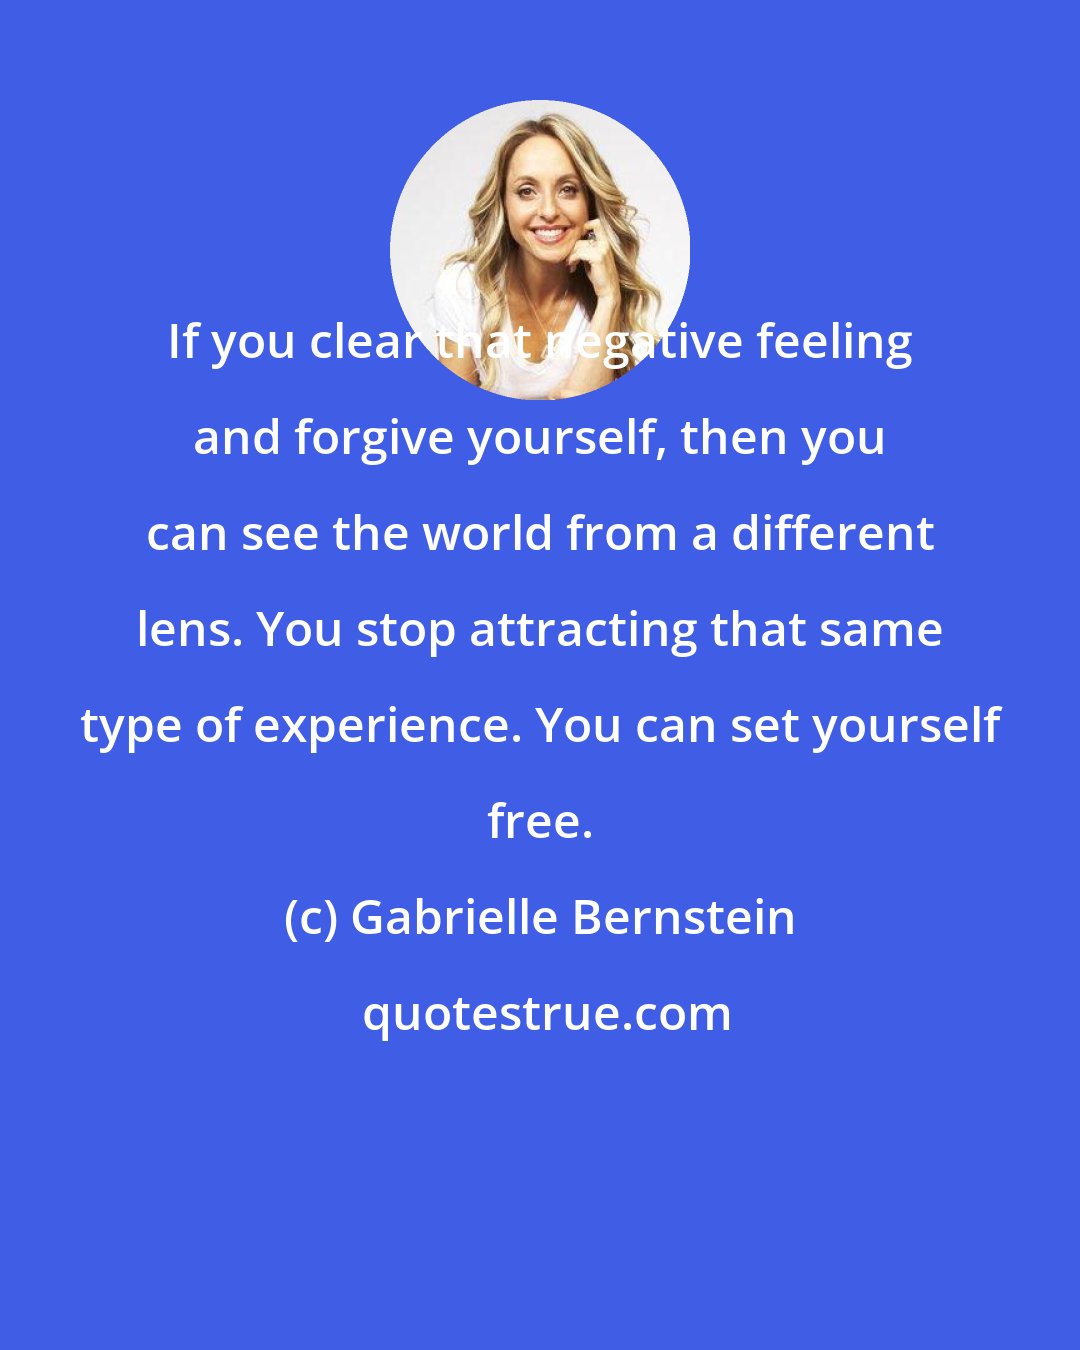 Gabrielle Bernstein: If you clear that negative feeling and forgive yourself, then you can see the world from a different lens. You stop attracting that same type of experience. You can set yourself free.